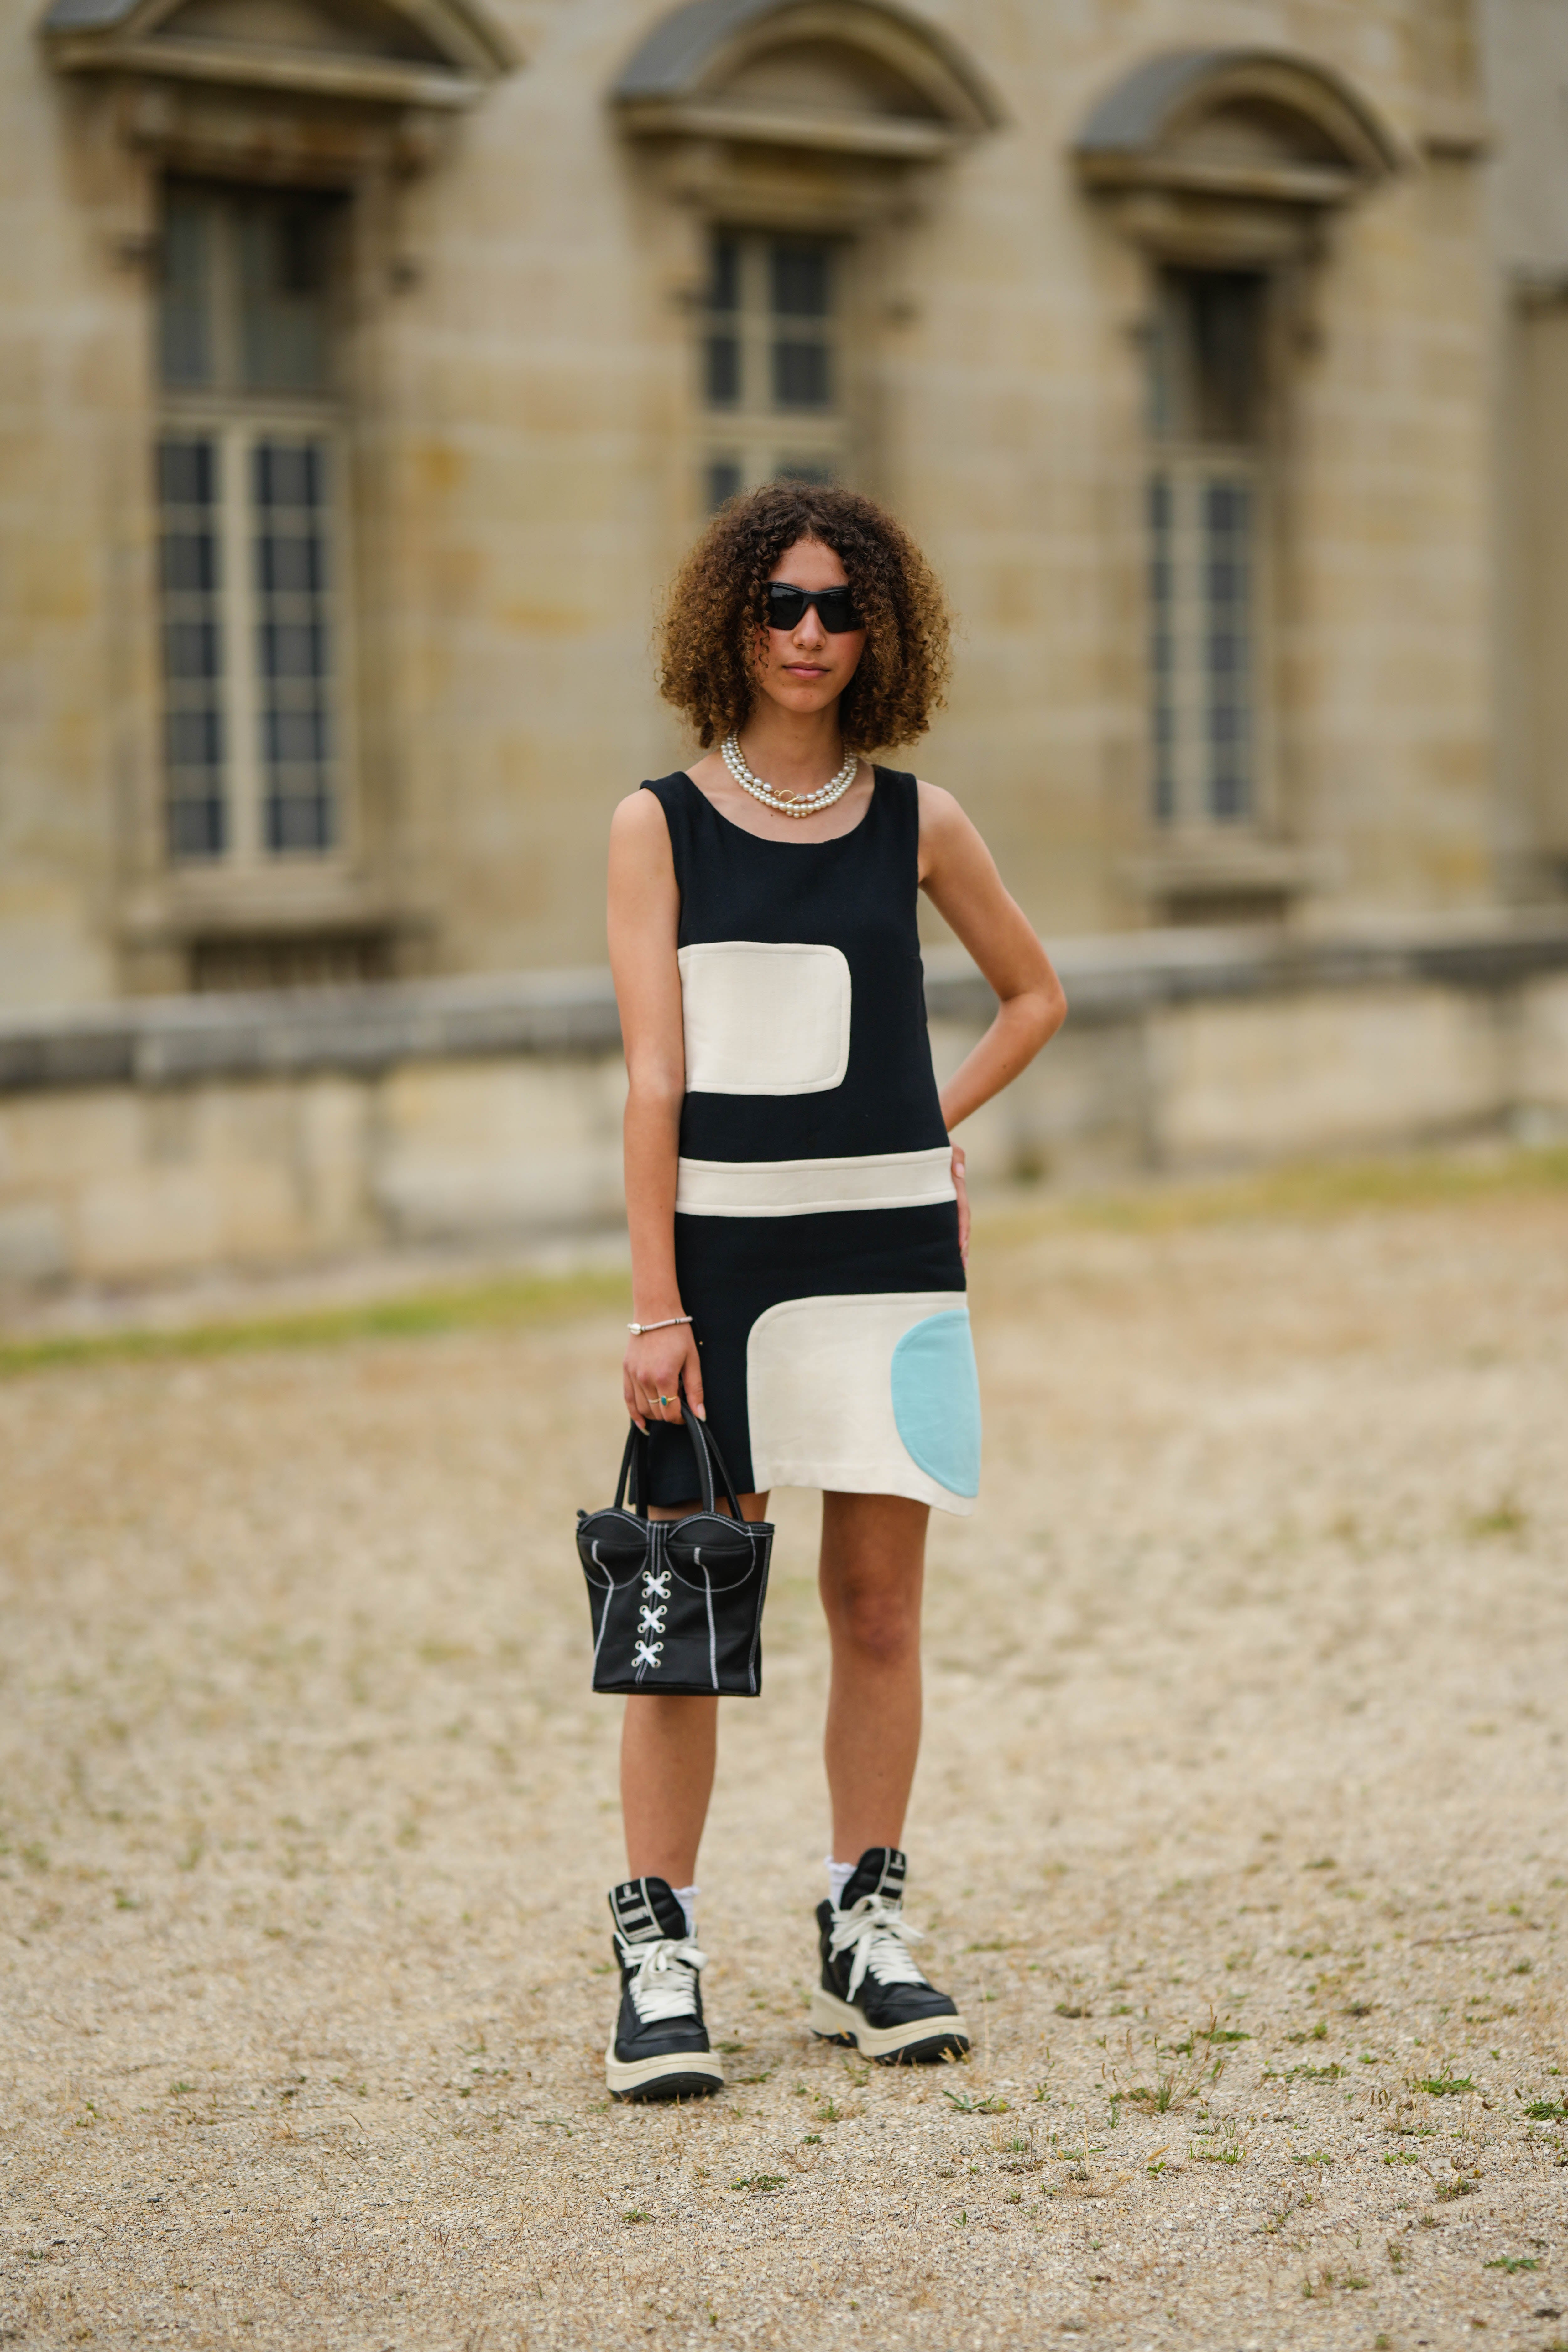 How To Wear Chunky Sneakers with Dresses - Vl7n Sneakers In